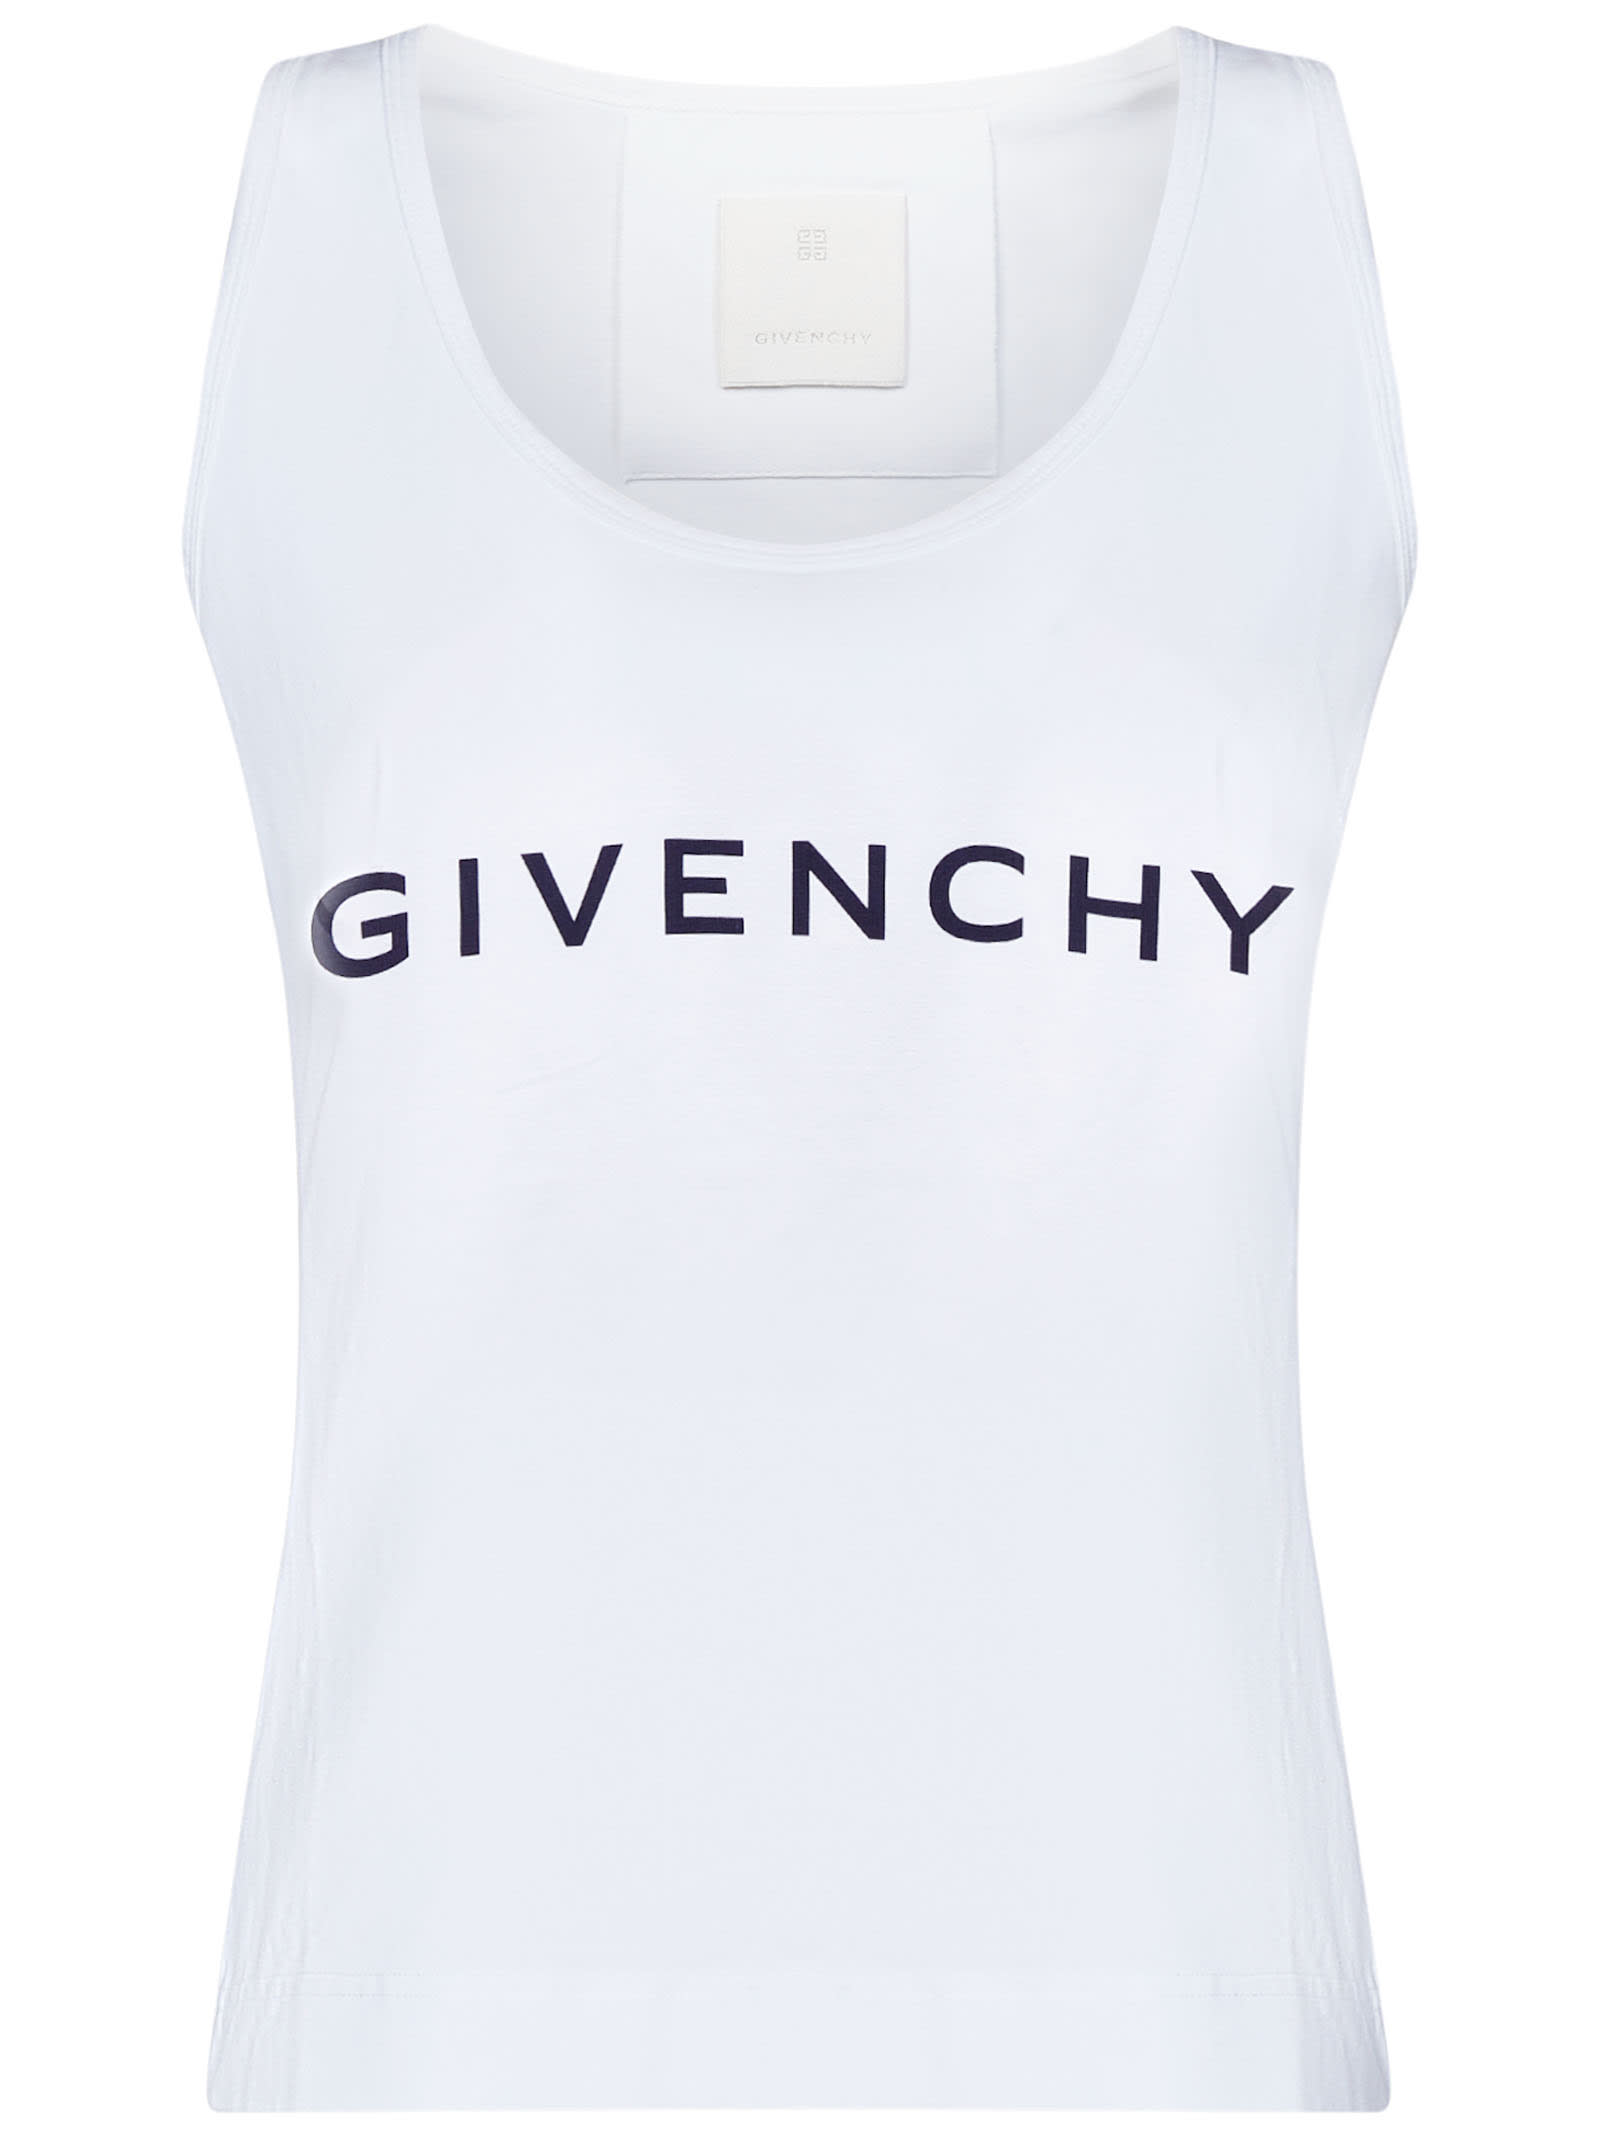 GIVENCHY ARCHETYPE TANK TOP